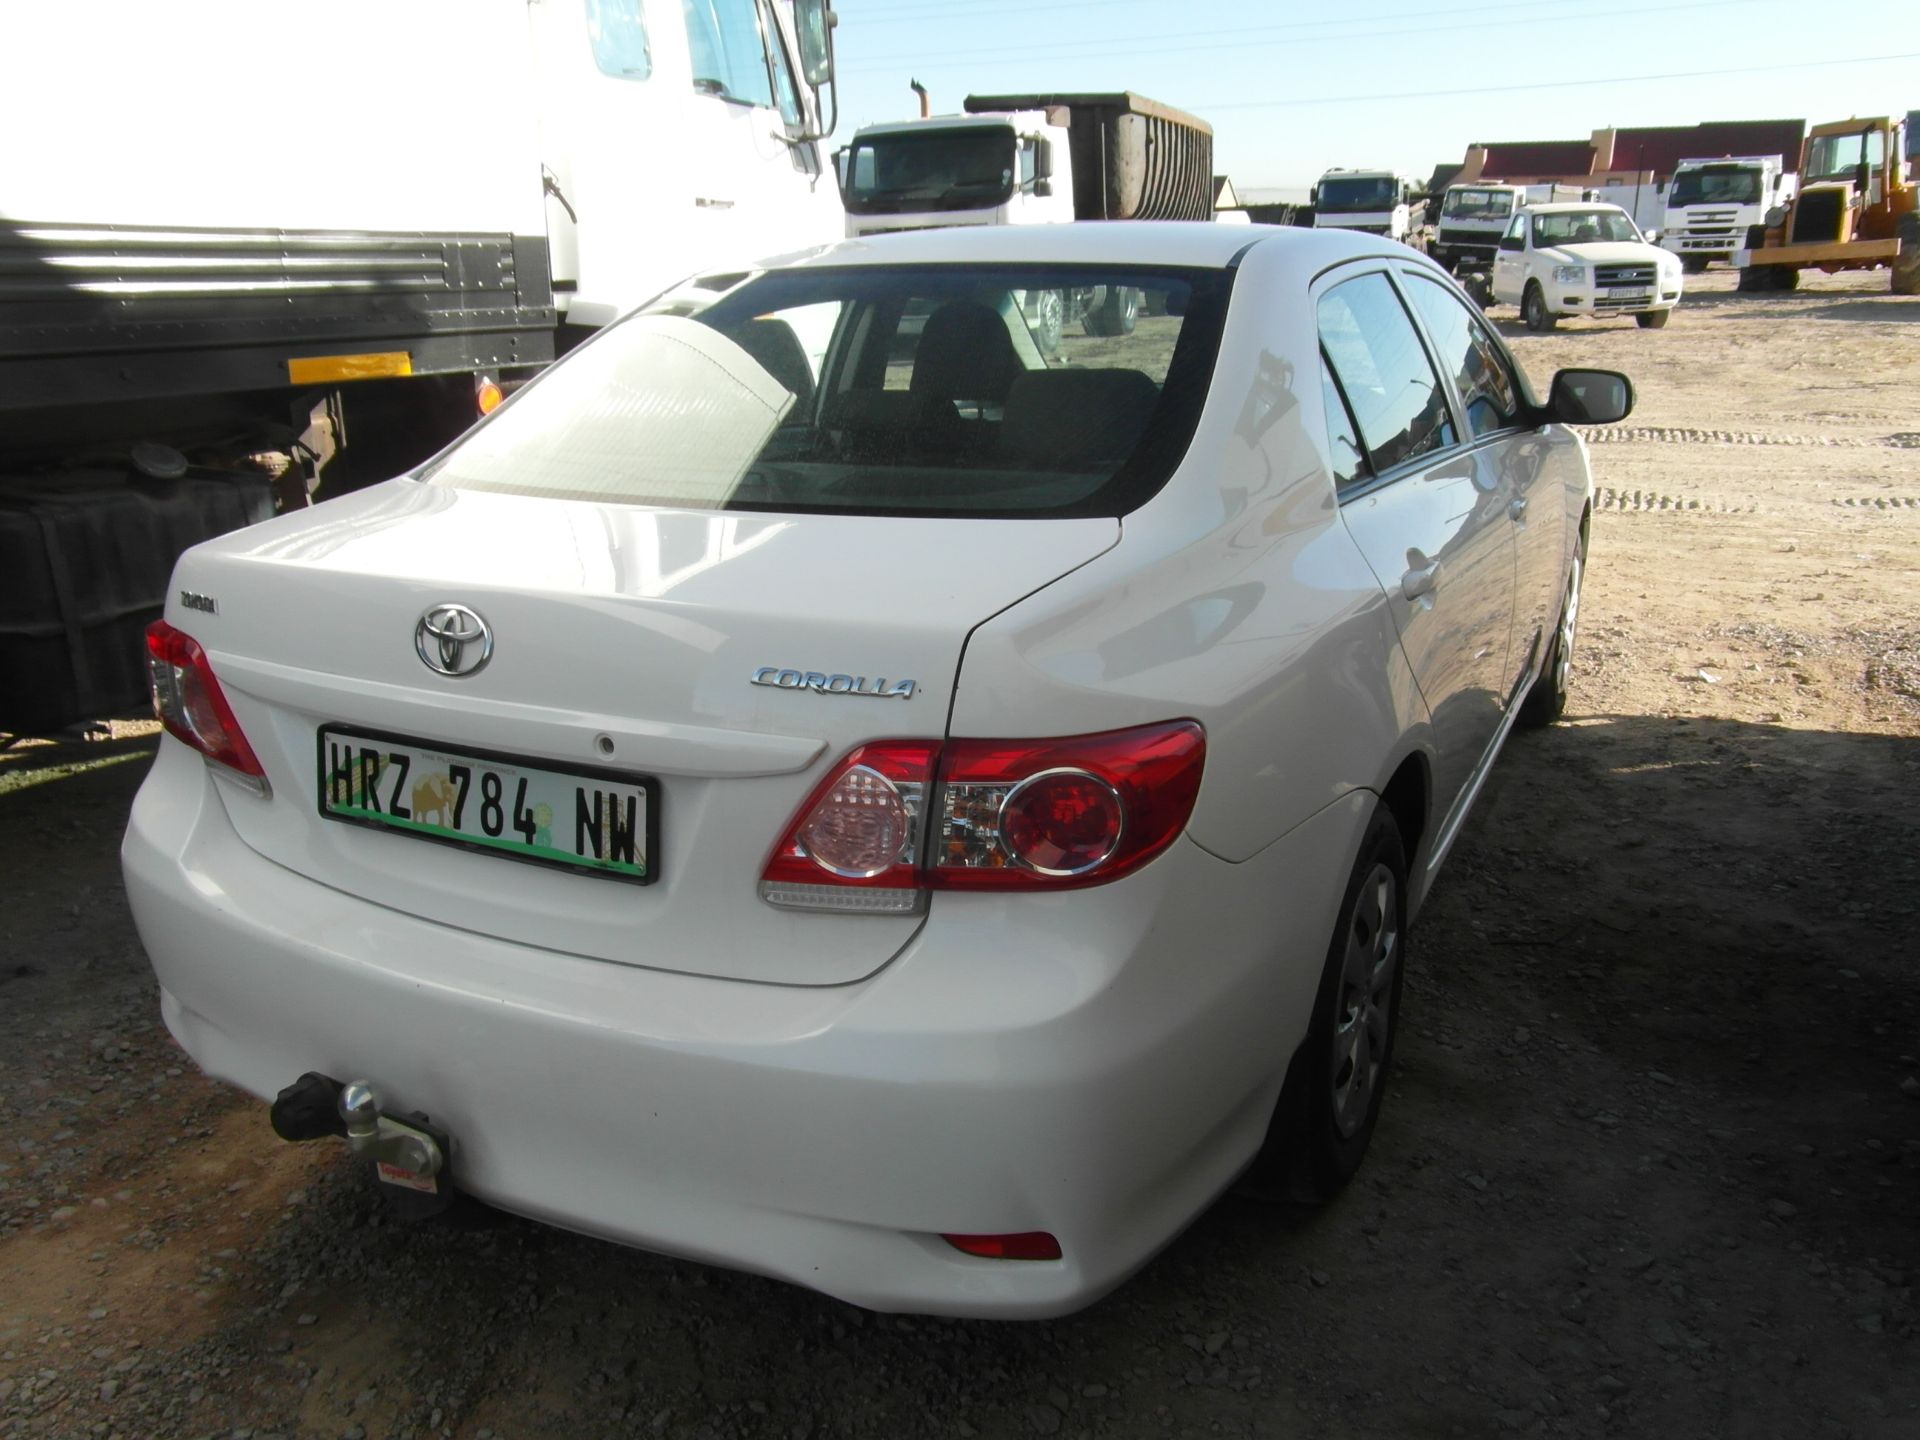 2011 HRZ784NW Toyota Corolla 1.3 Professional (Vin No: AHTLT58E206027539 )(87 385 kms) - Image 3 of 4